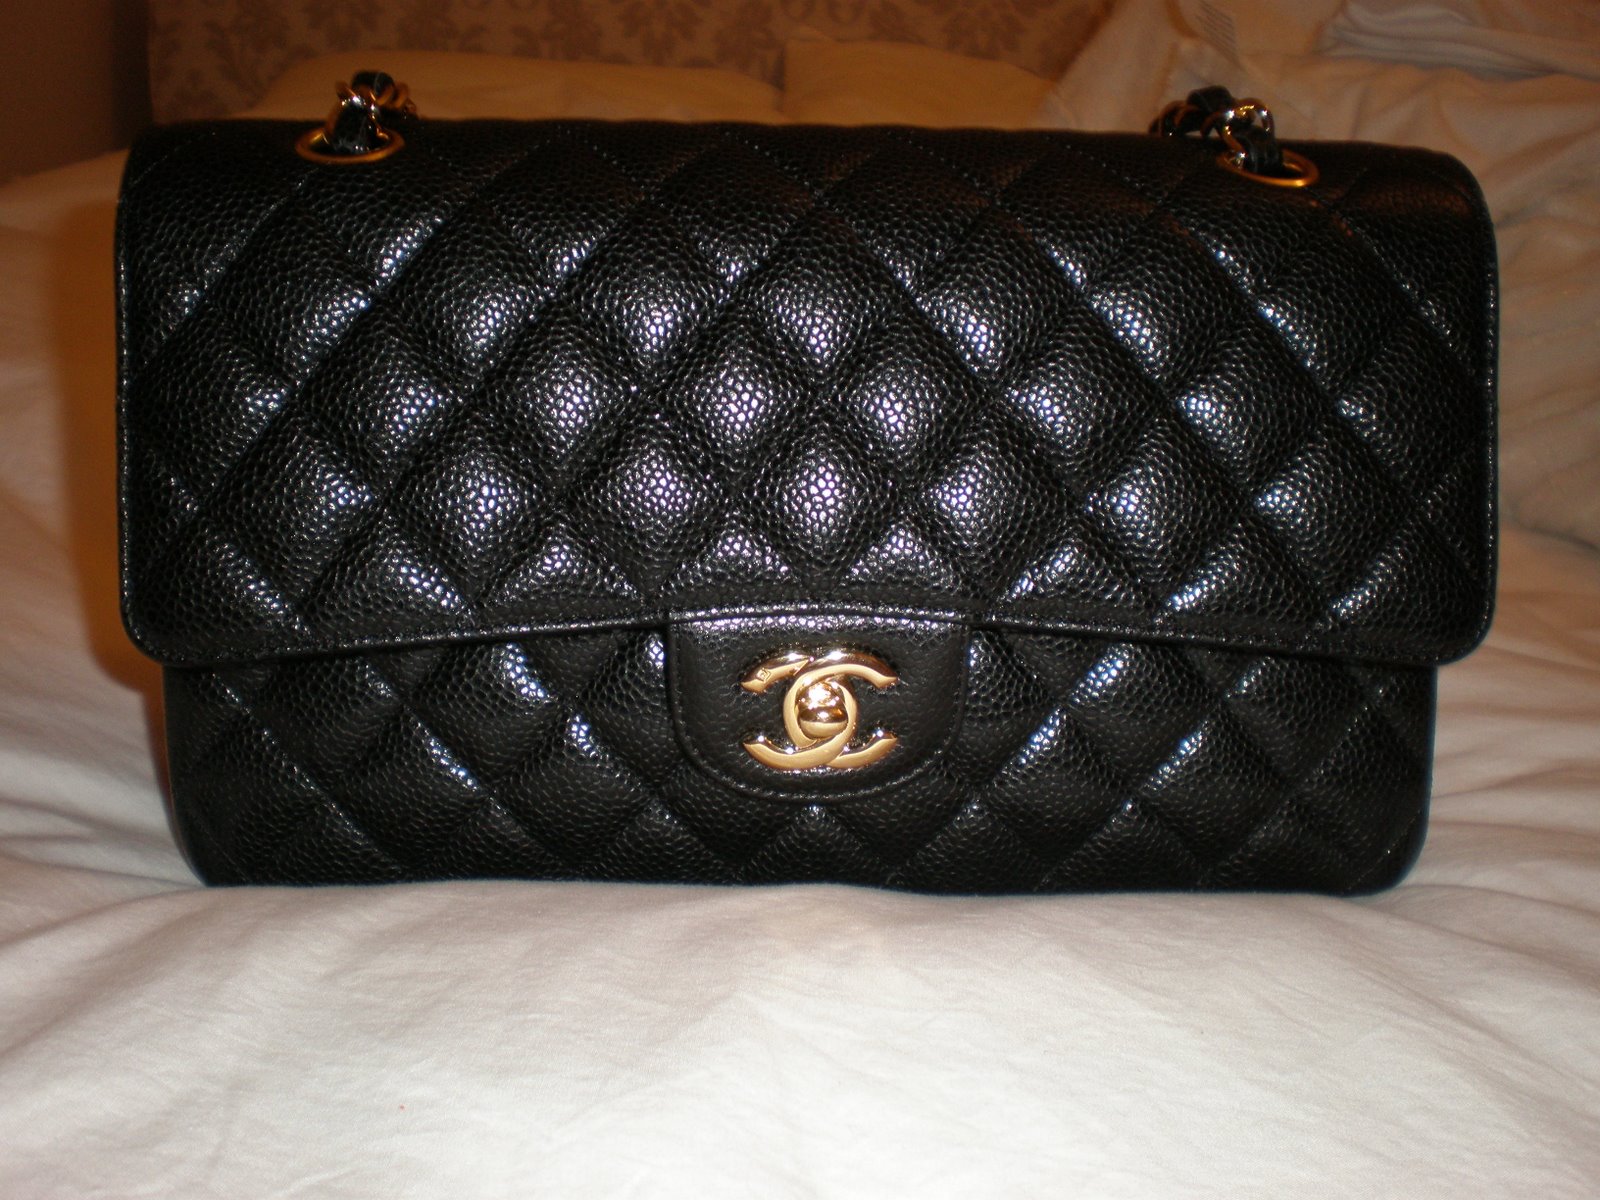 My Chanel Arrived...